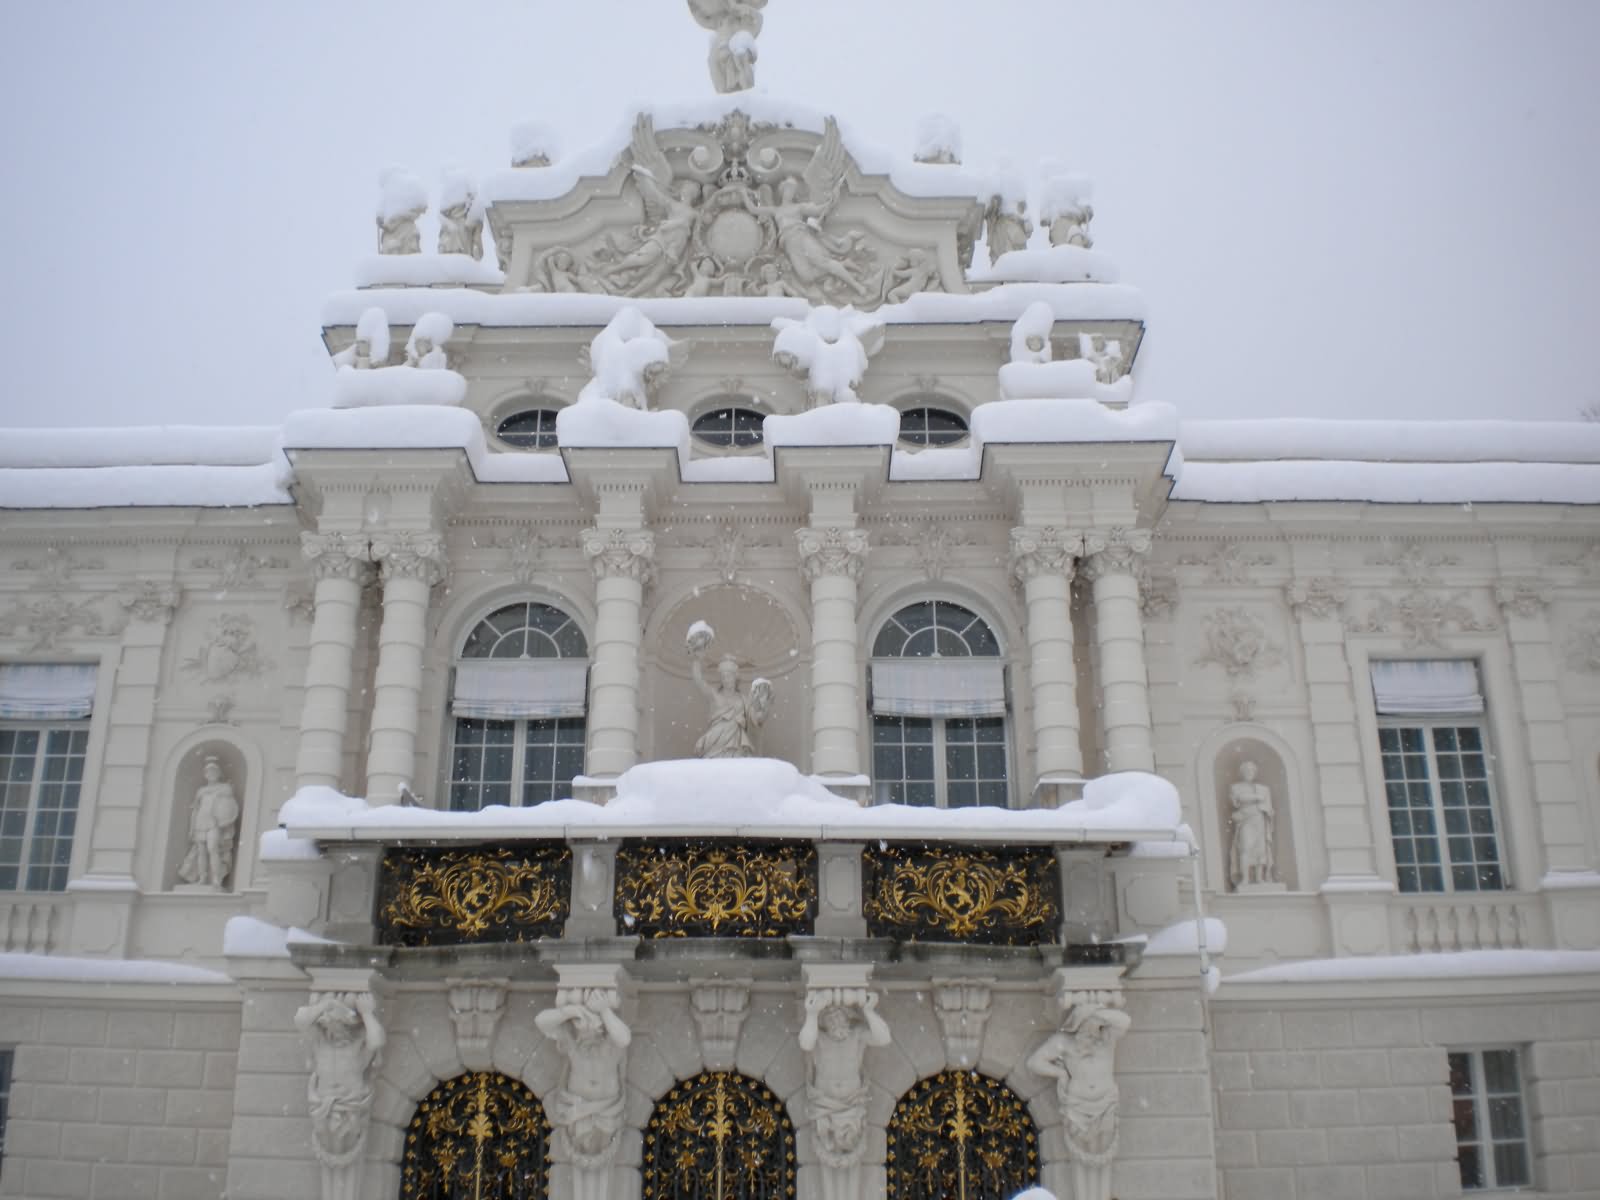 15 Stunning Pictures And Images Of The Linderhof Palace During Winters